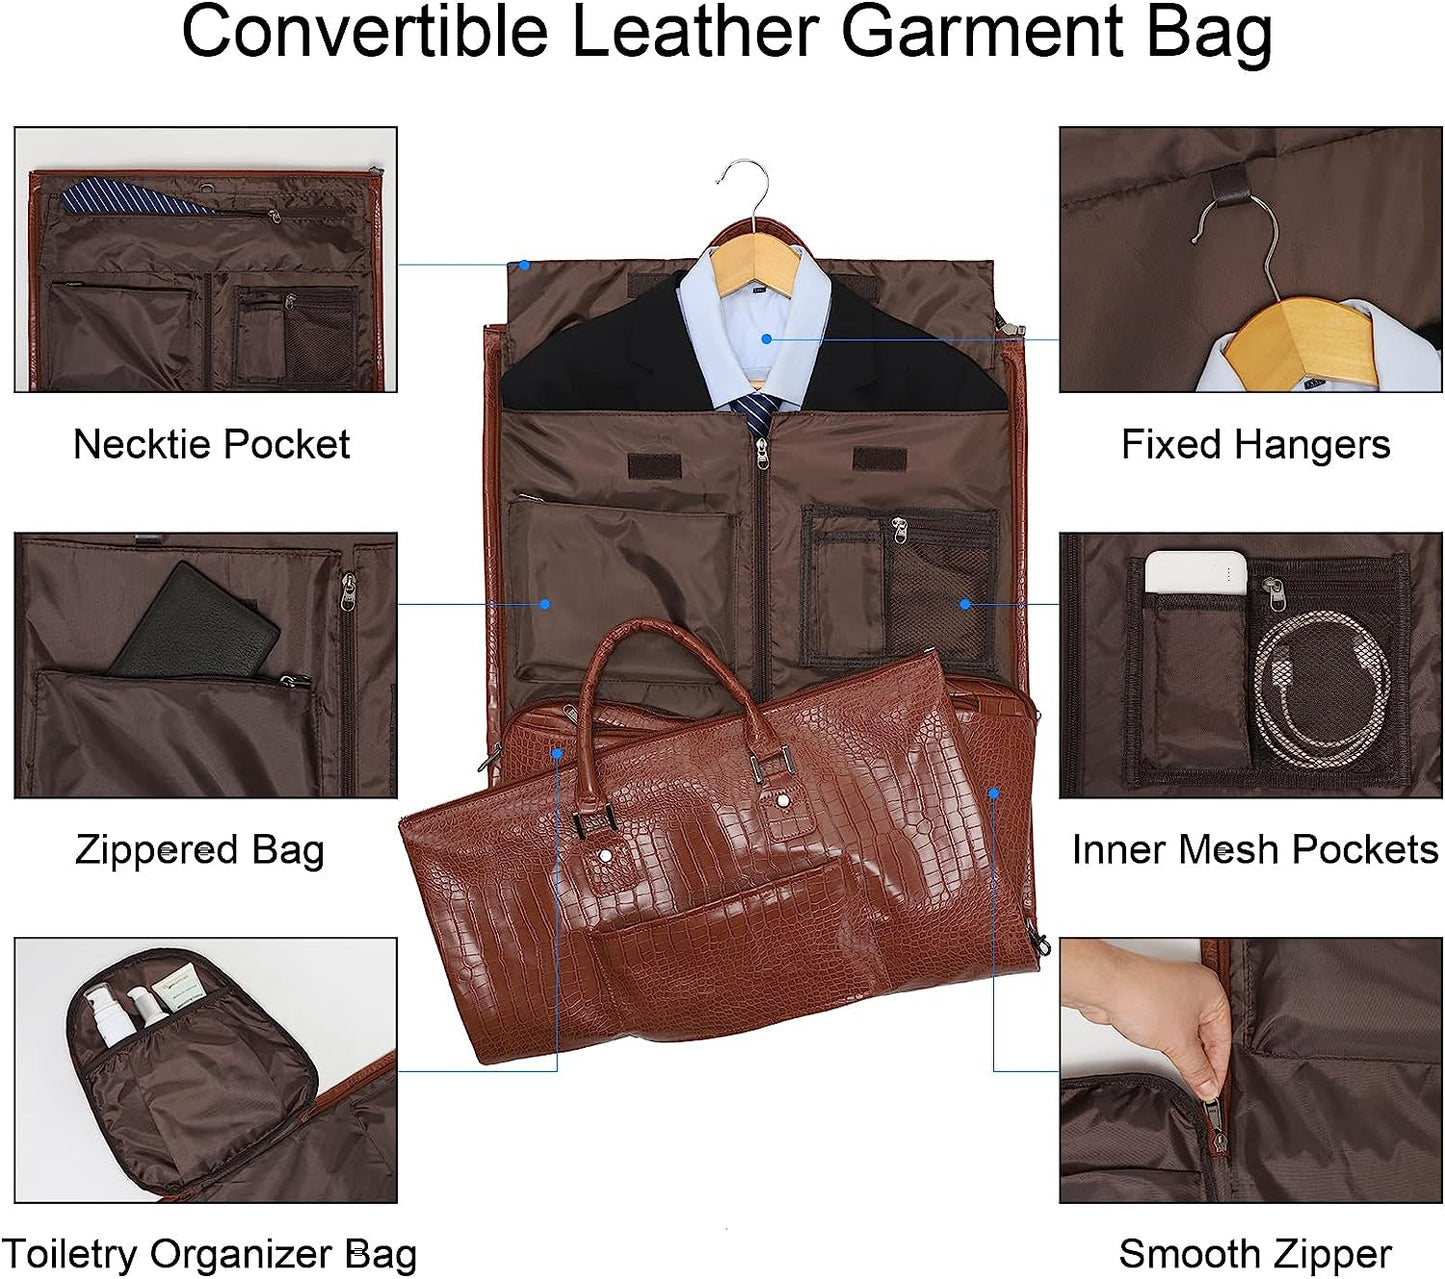 Convertible Leather Garment Bag, Carry on Garment Bags for Travel Waterproof Garment Duffel Bag Gifts for Men Women Business - 2 in 1 Hanging Suitcase Suit Travel Bags in Light Brown